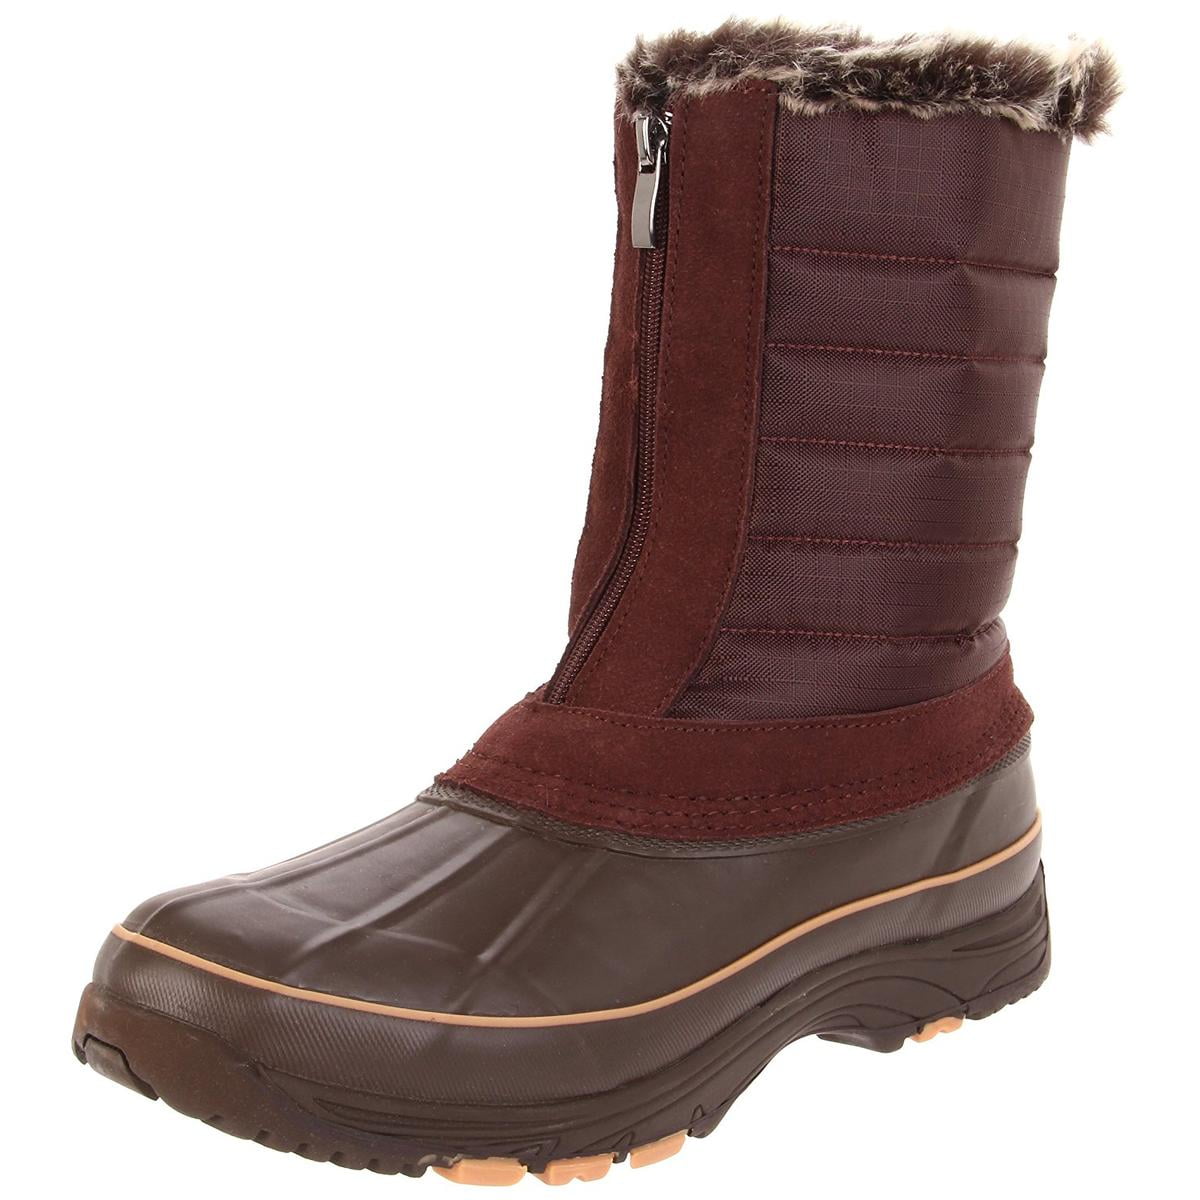 Buy > aquatherm boots review > in stock